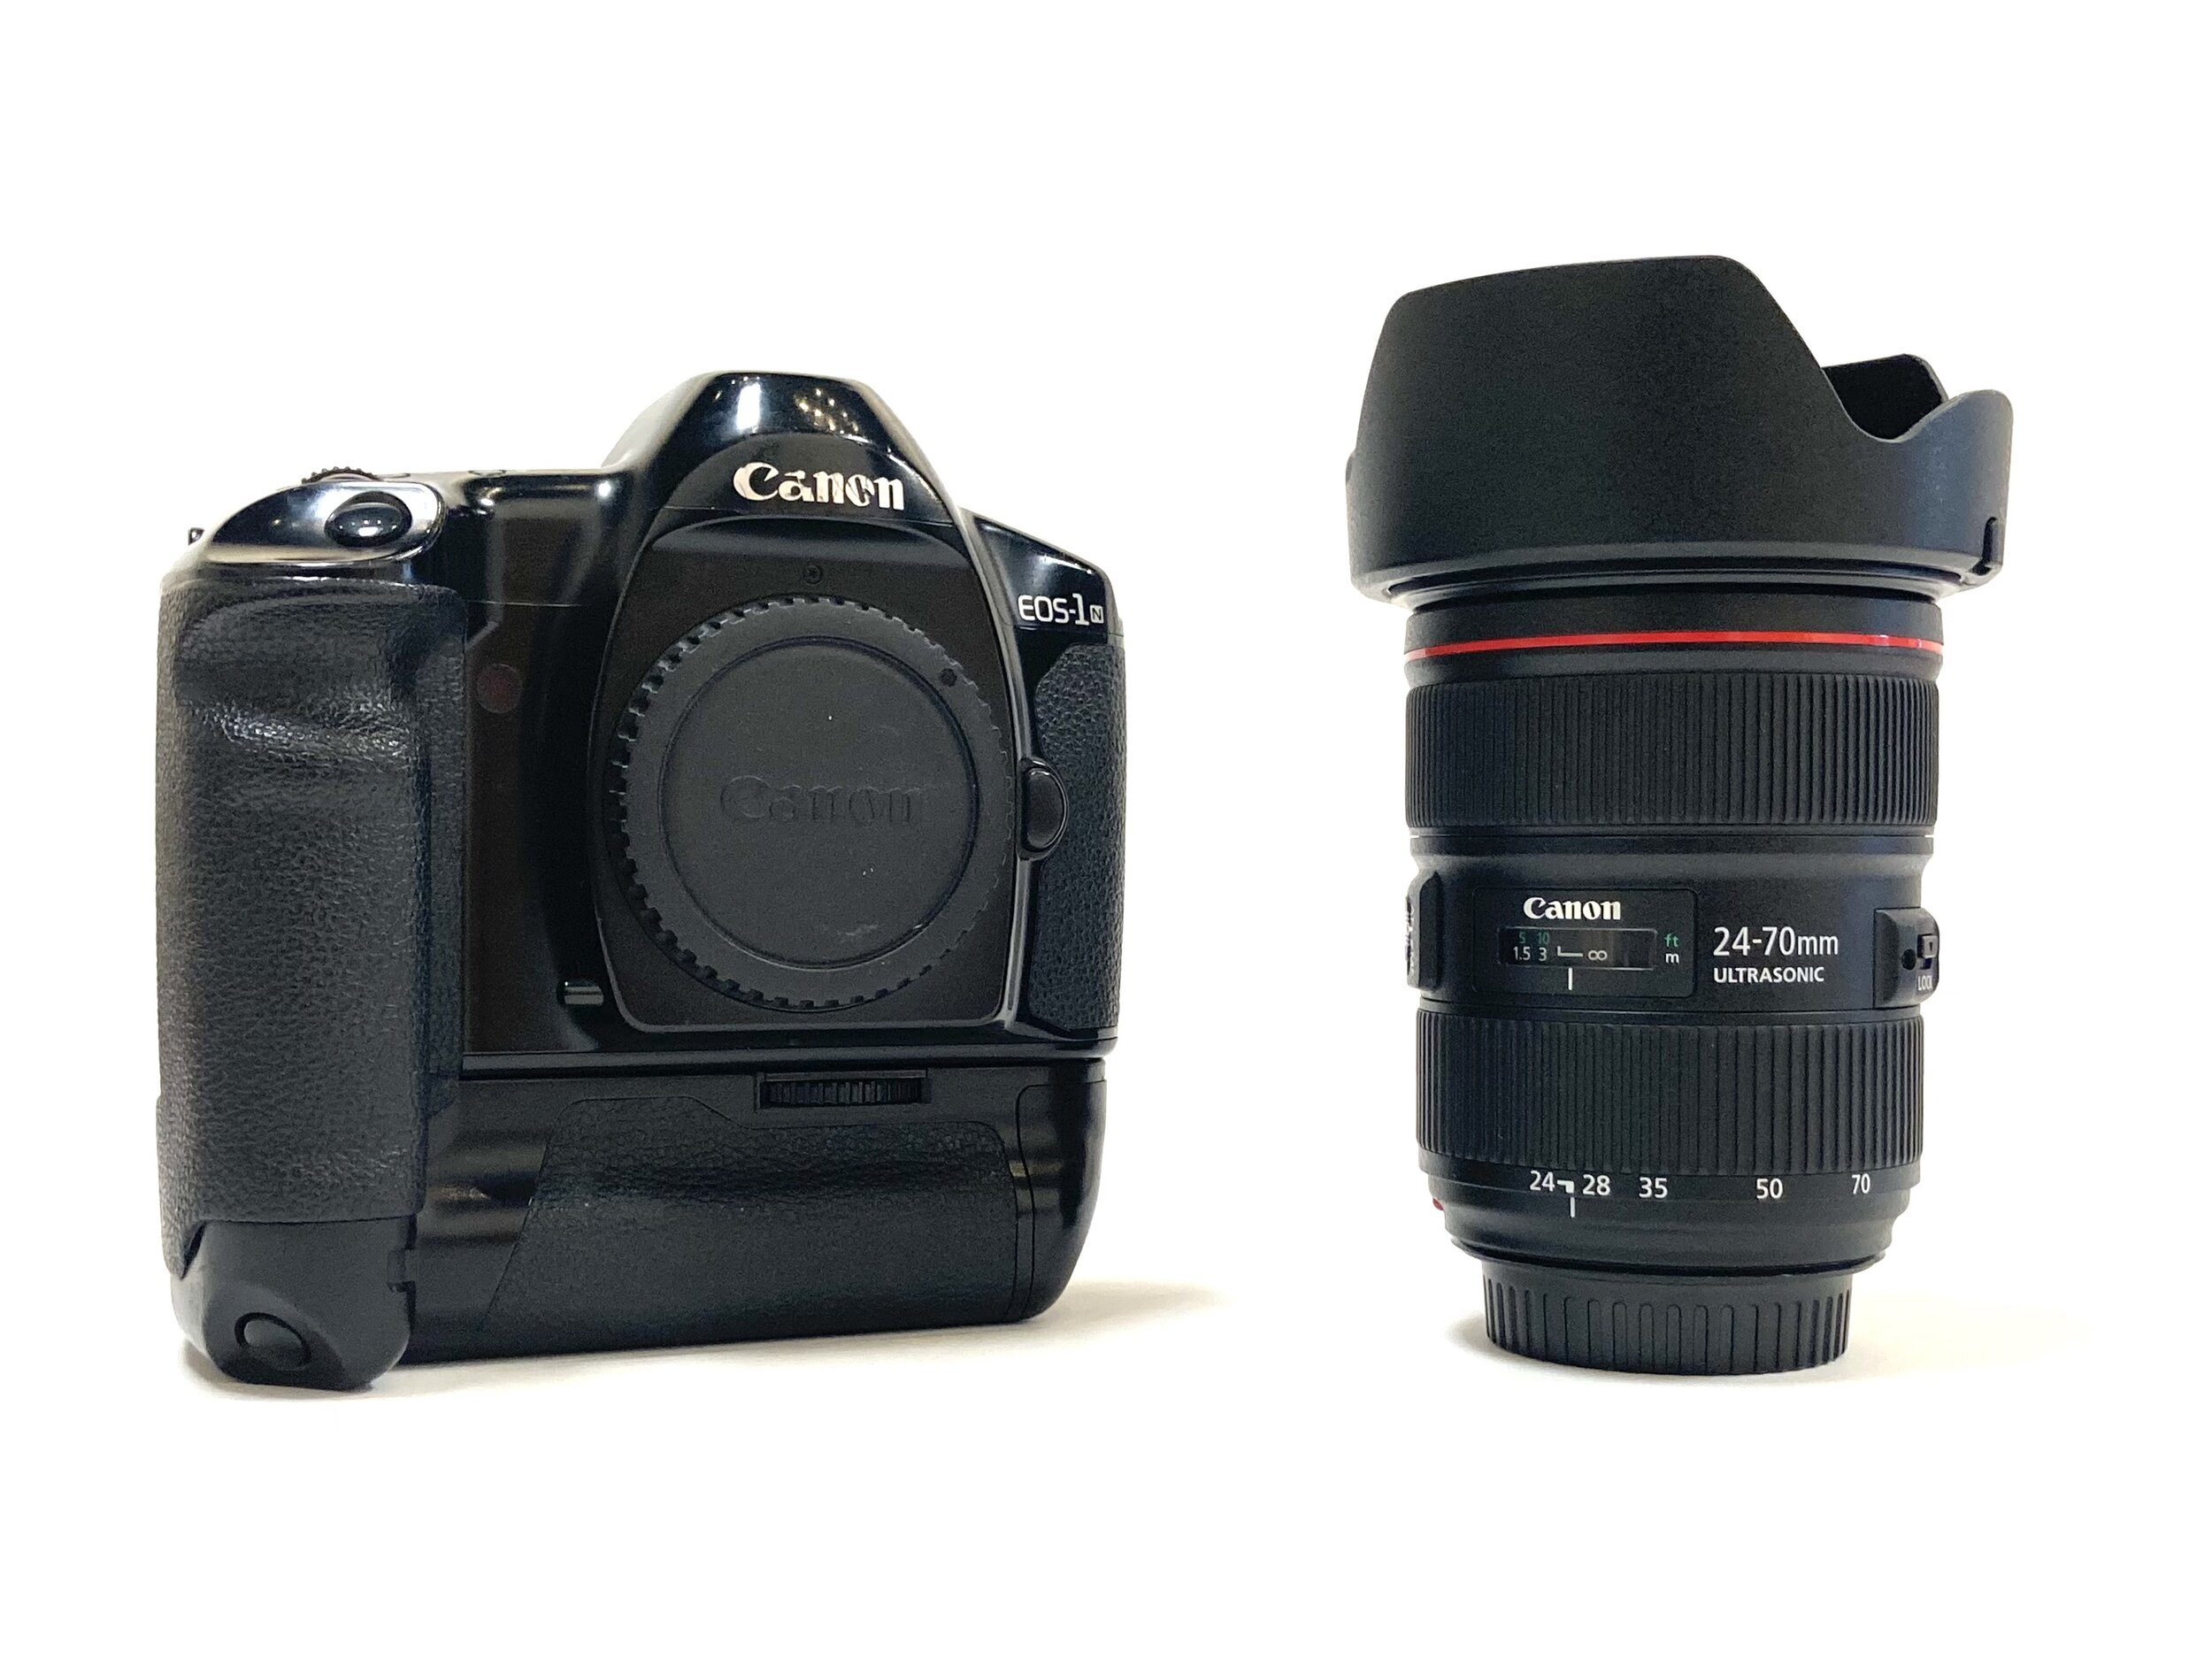 Canon EOS-1n w/ Power Drive Booster E1 and Canon EF 24-70mm f/2.8L II USM  Lens — Photographique